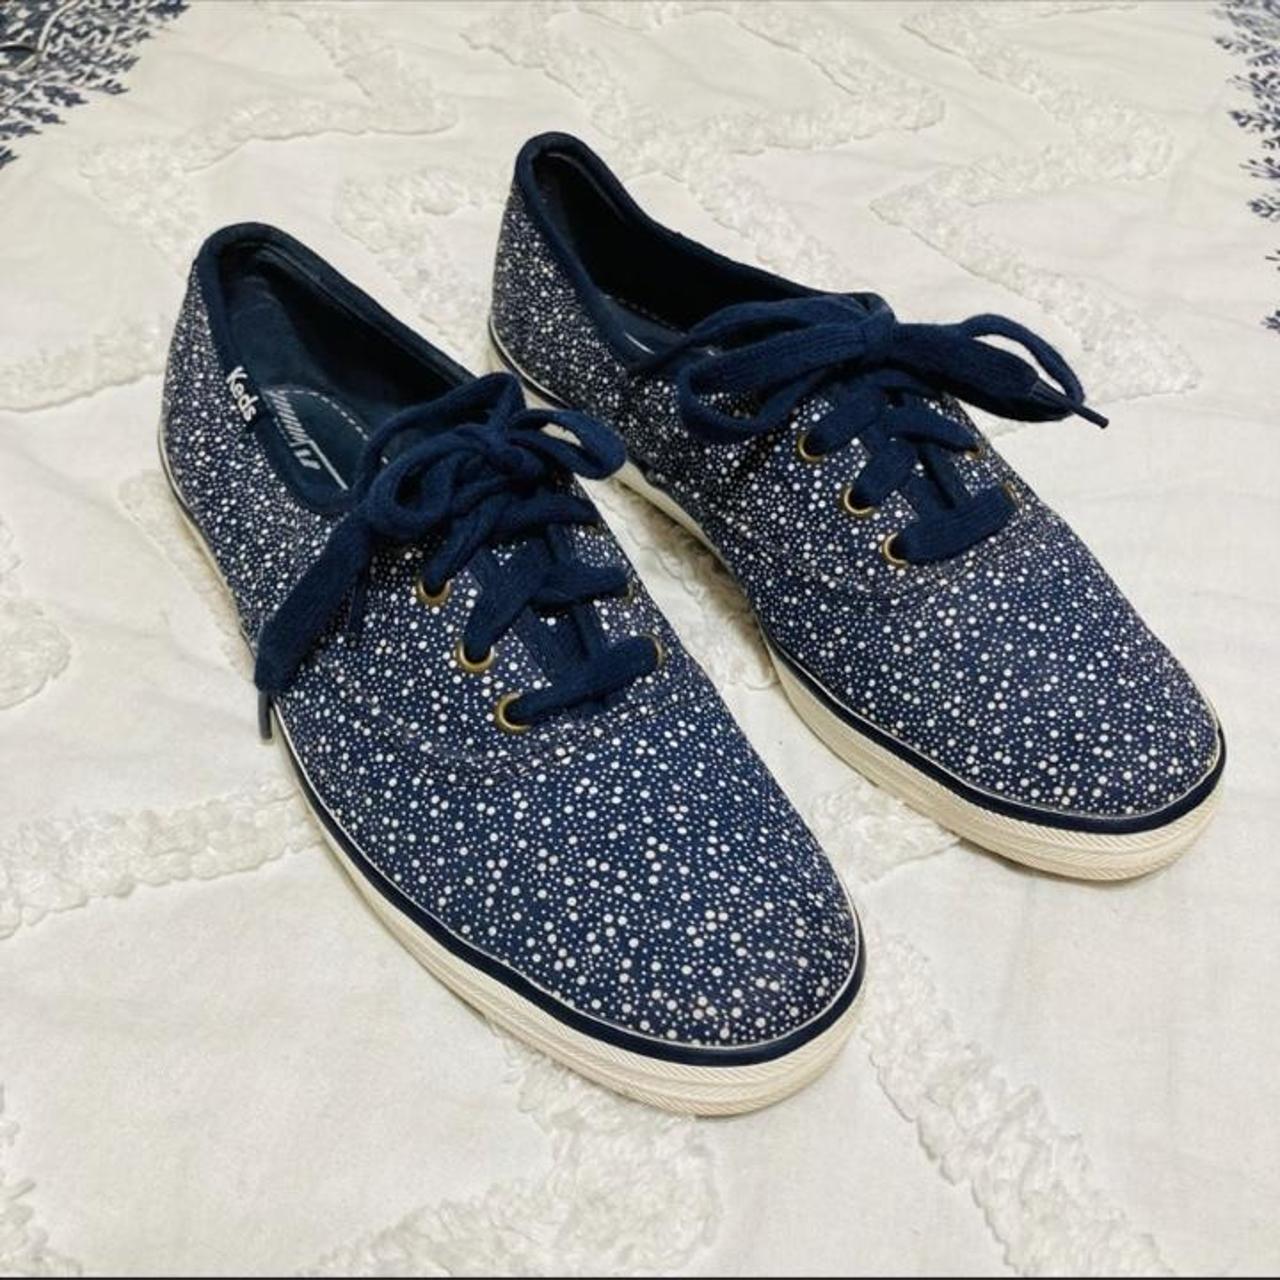 Product Image 3 - Polka Dot Twee Sneakers

Blue and